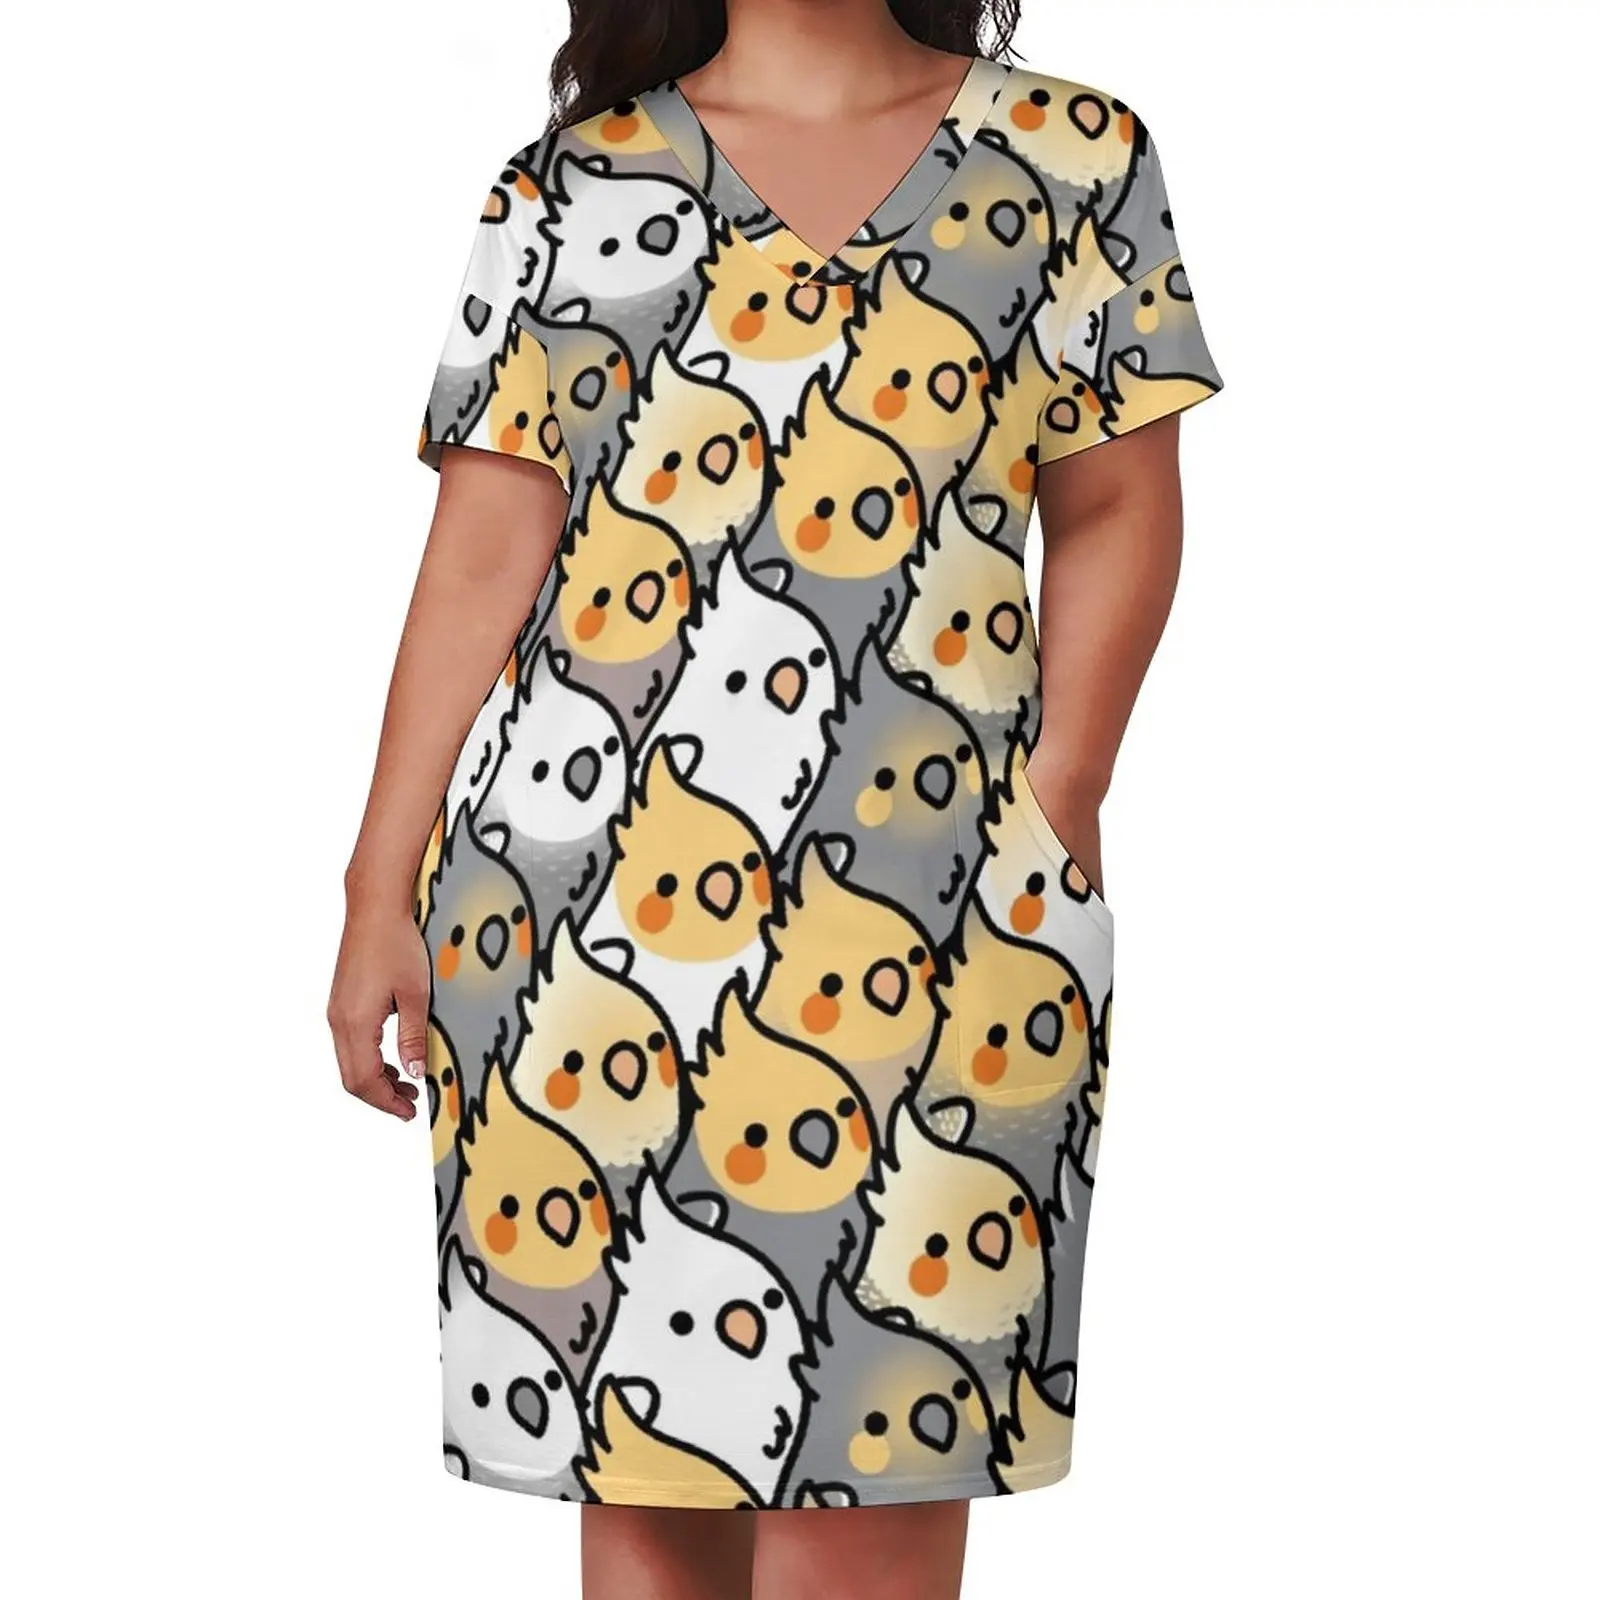 Cartoon Parrot Dress Plus Size Chubby Cockatiel Party Aesthetic Casual Dress Female Summer V Neck Cute Dresses Birthday Present